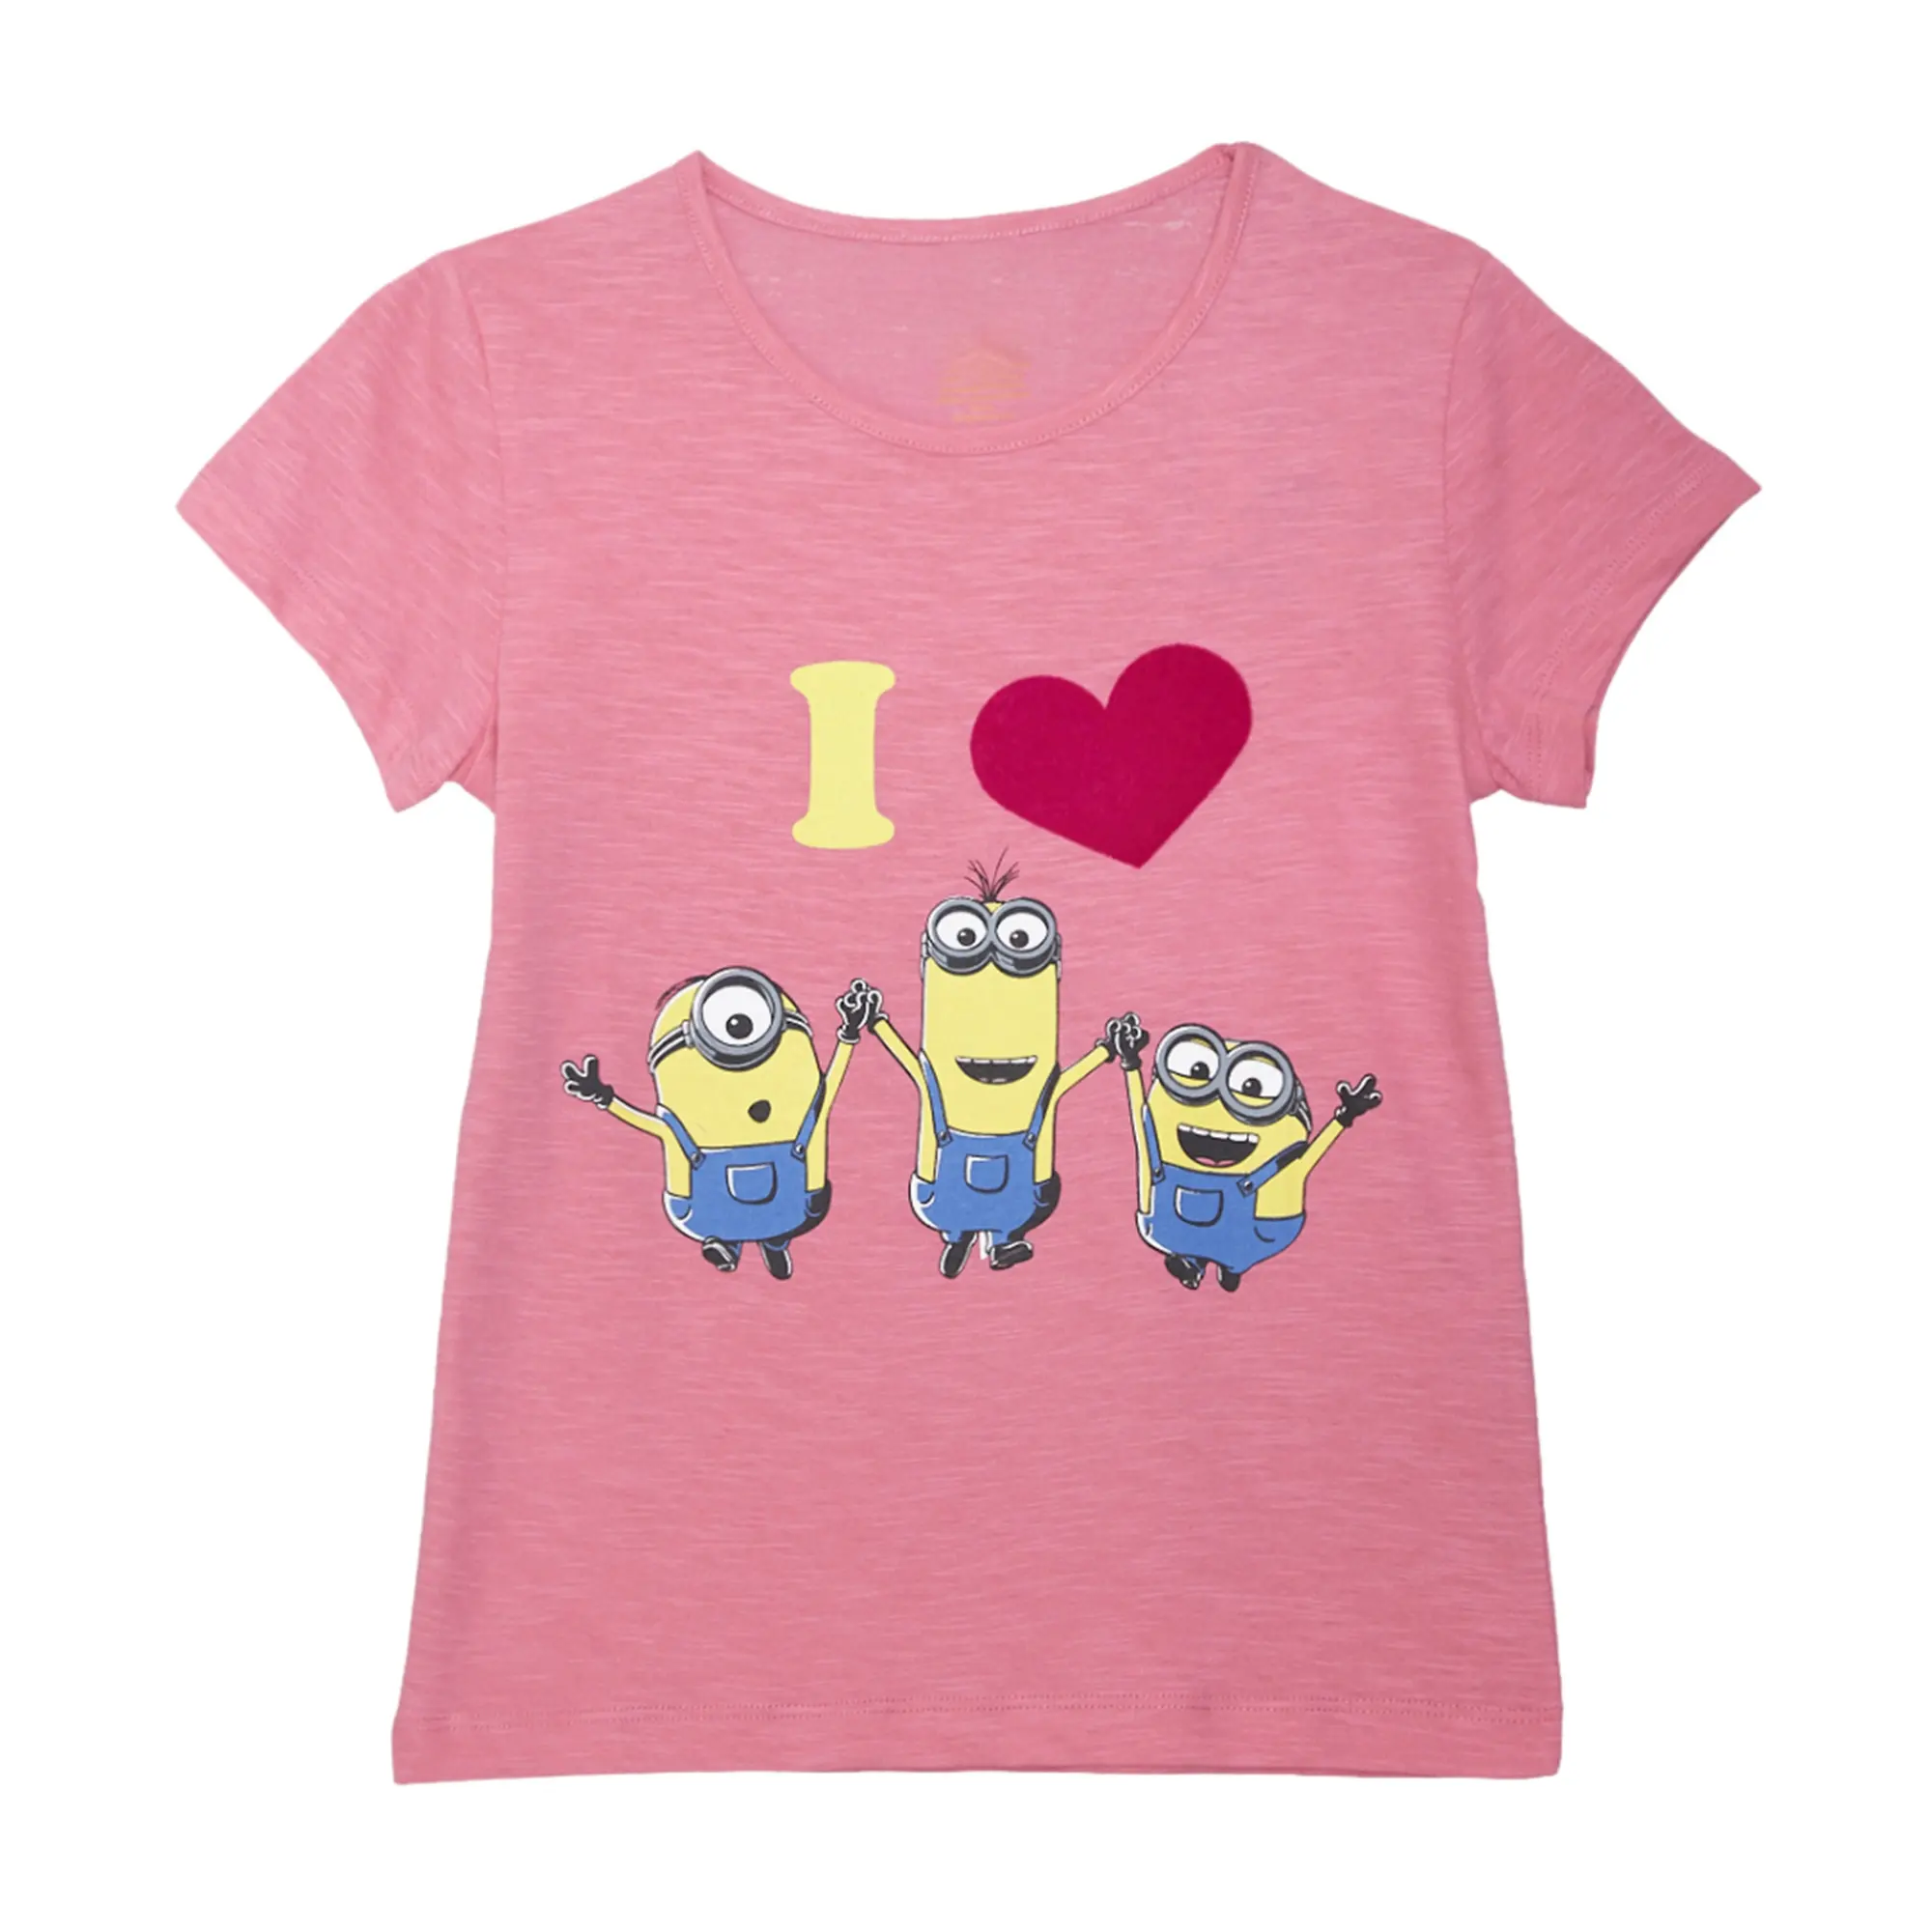 Best quality new branded labels girls children's Kids casual t-shirt summer clothing Top cheap price wholesales from Bangladesh